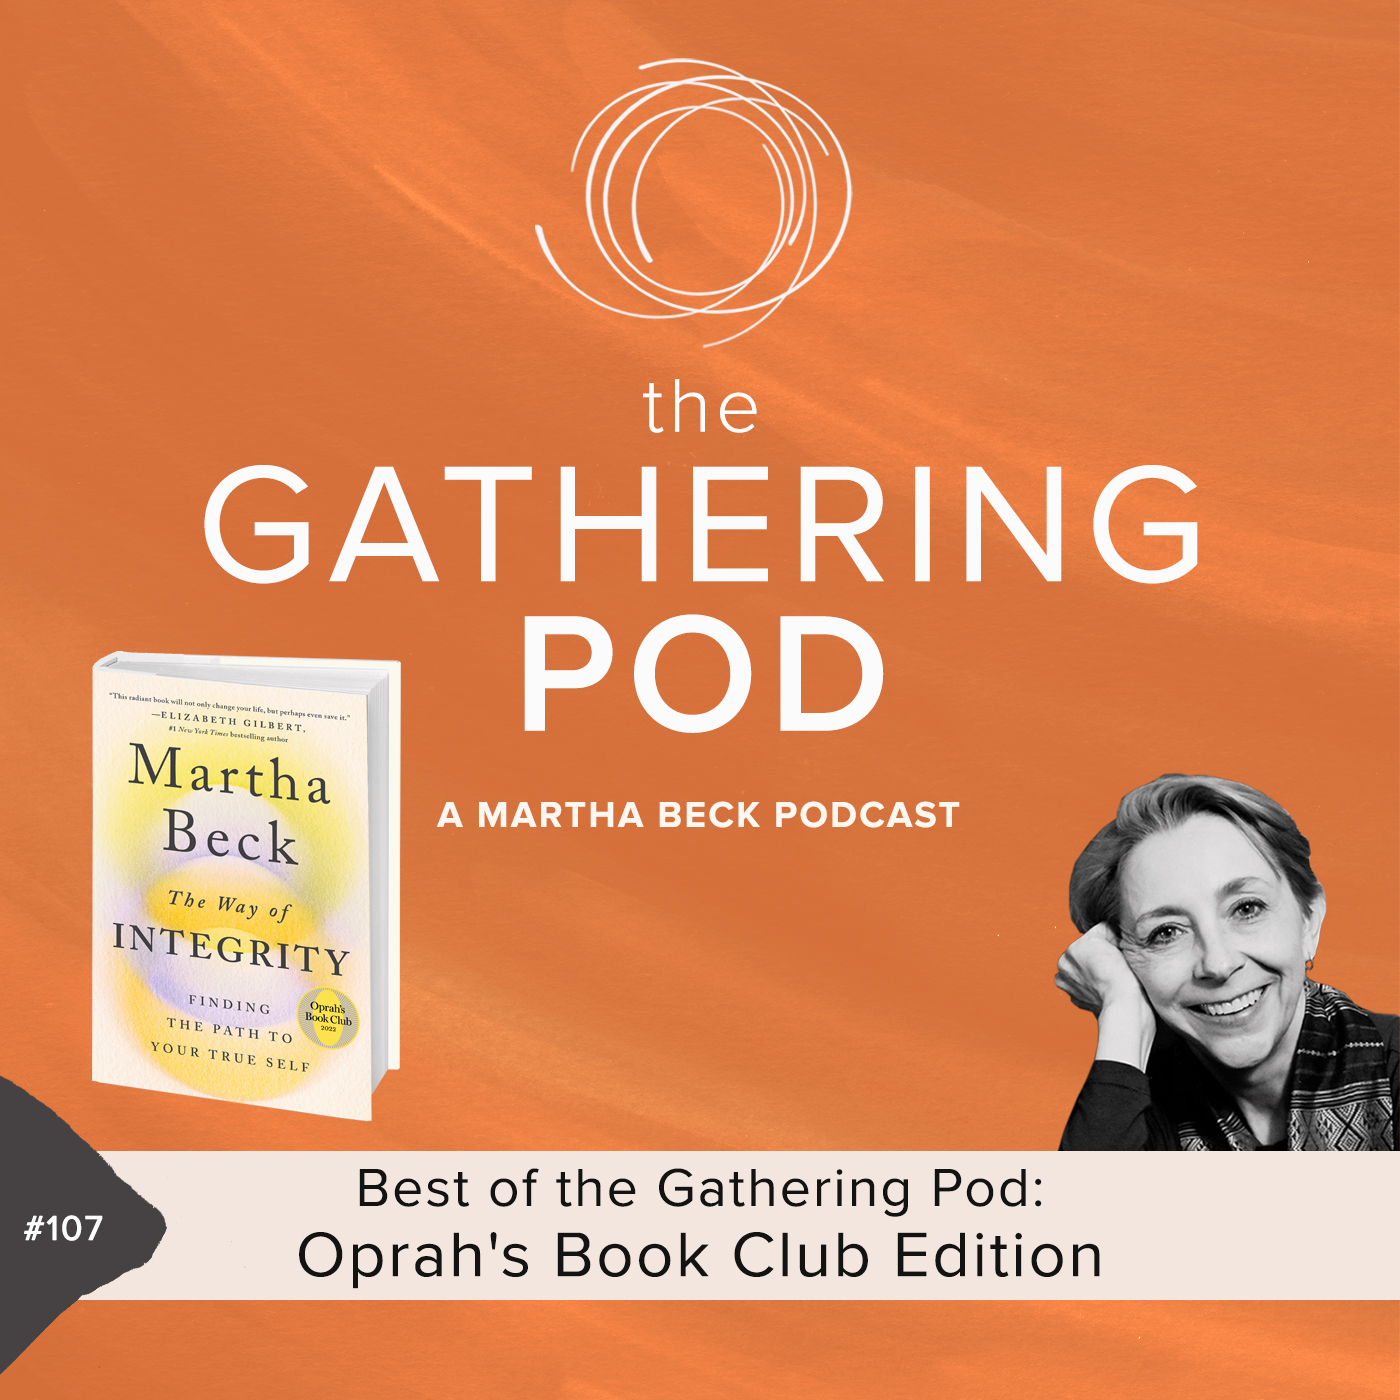 Image for The Gathering Pod A Martha Beck Podcast Episode #107 Best of the Gathering Pod: Oprah’s Book Club Edition